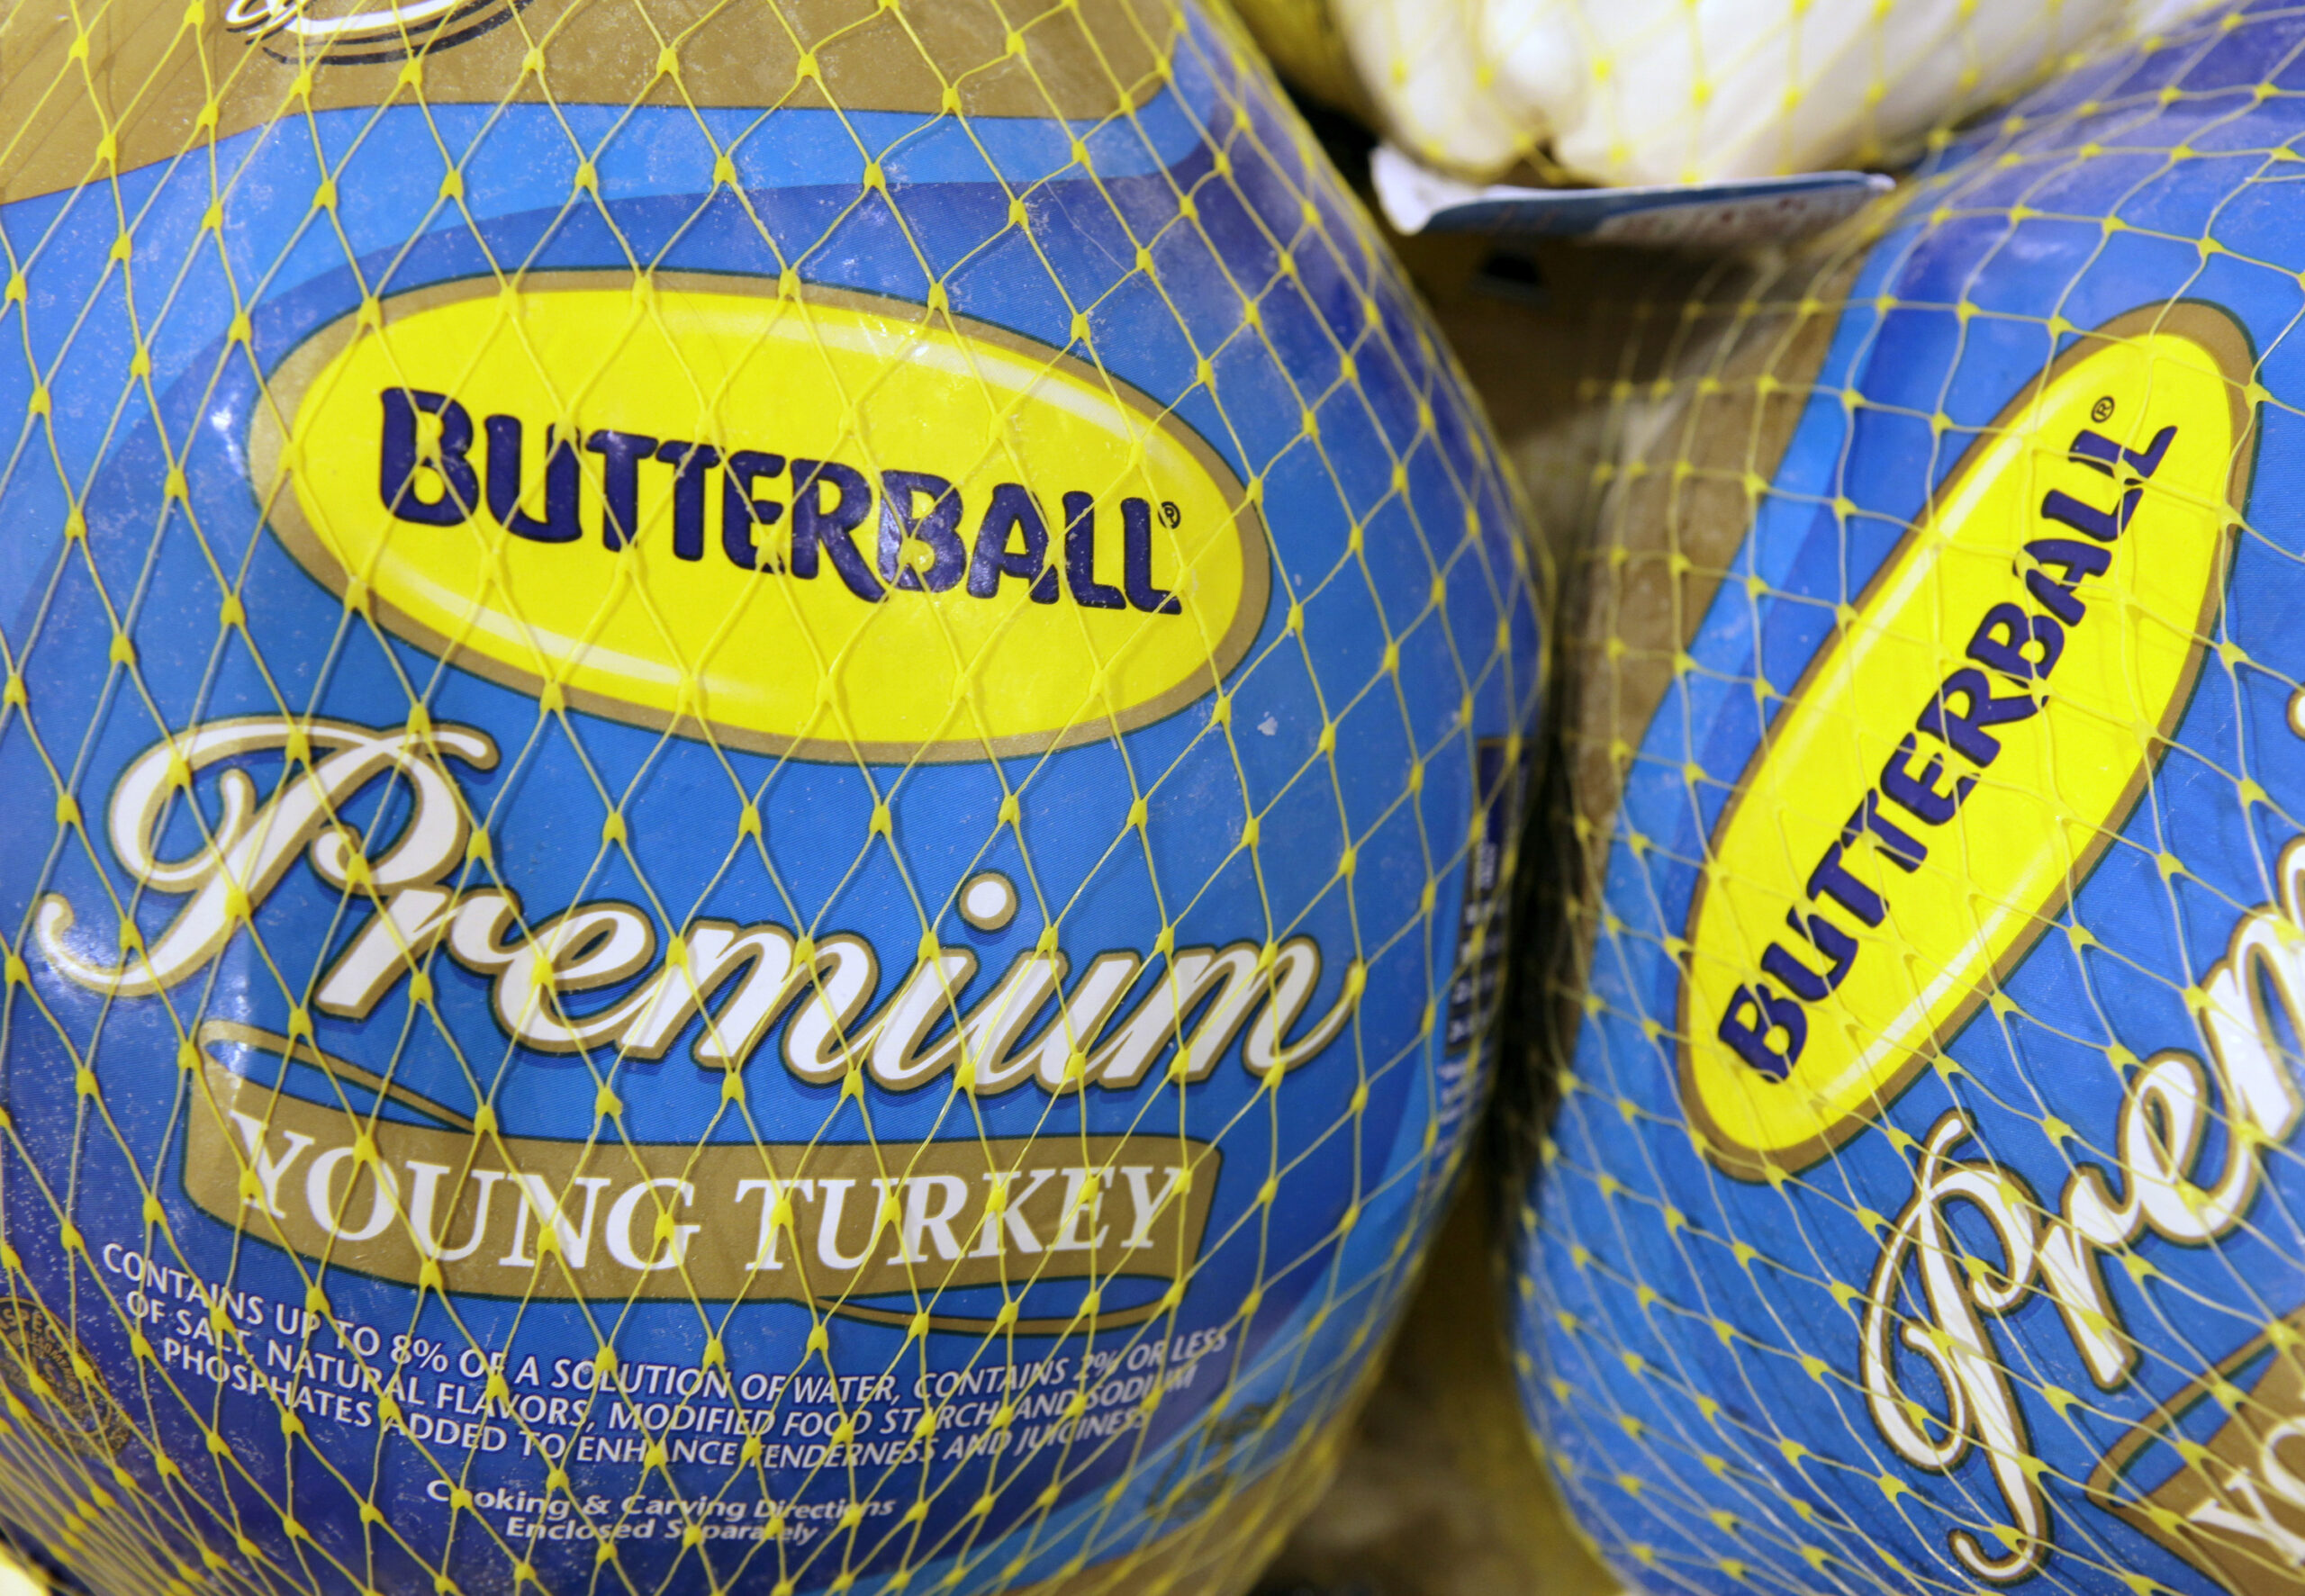 Butterball Recalls Ground Turkey After 4 Fall Ill In Wisconsin